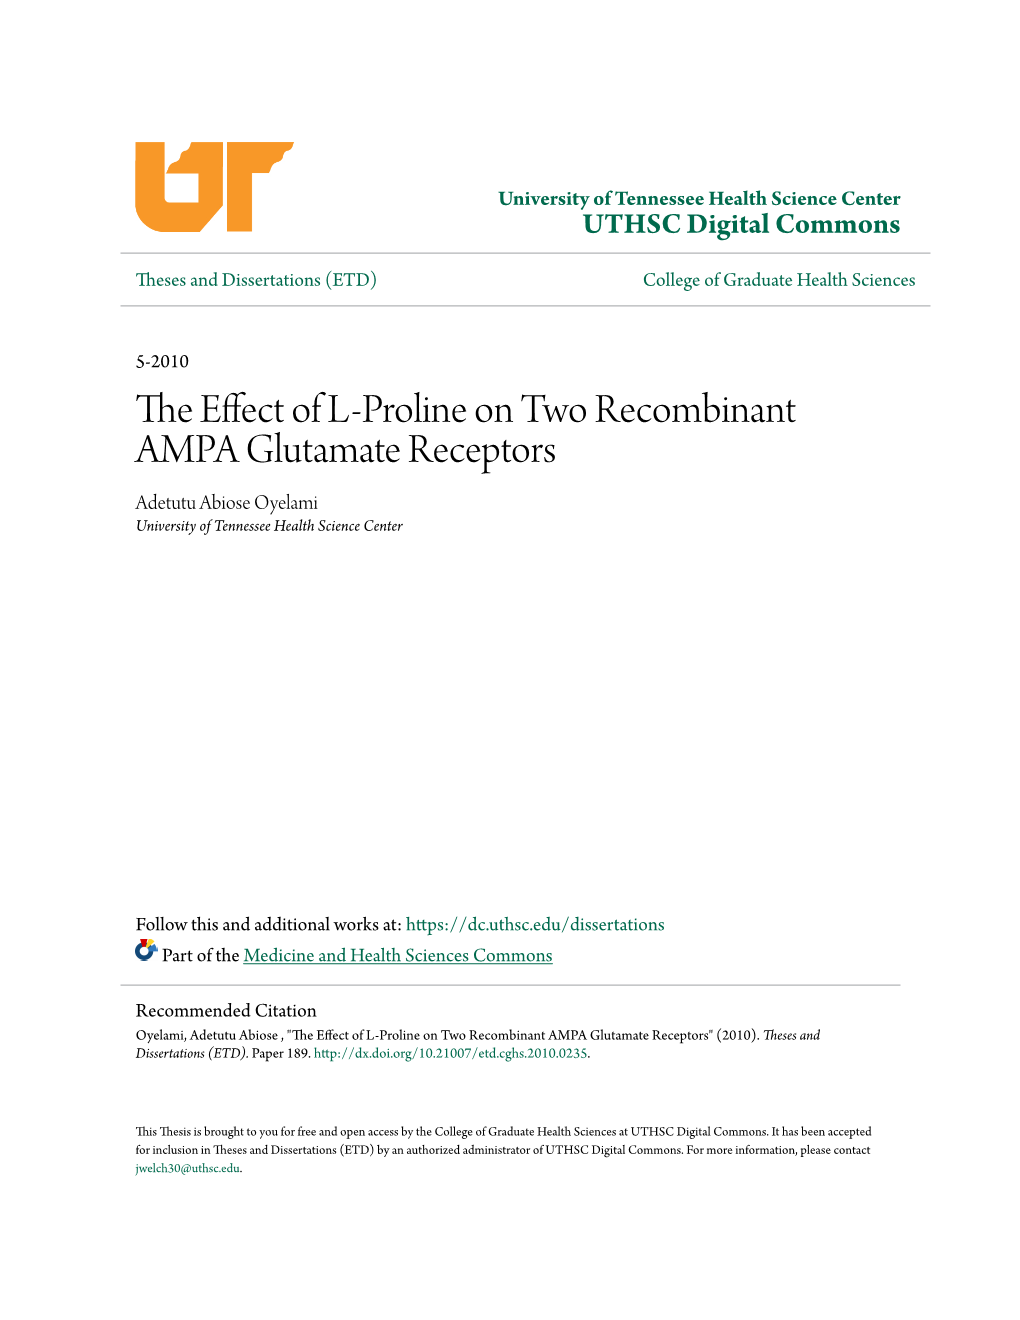 The Effect of L-Proline on Two Recombinant AMPA Glutamate Receptors" (2010)